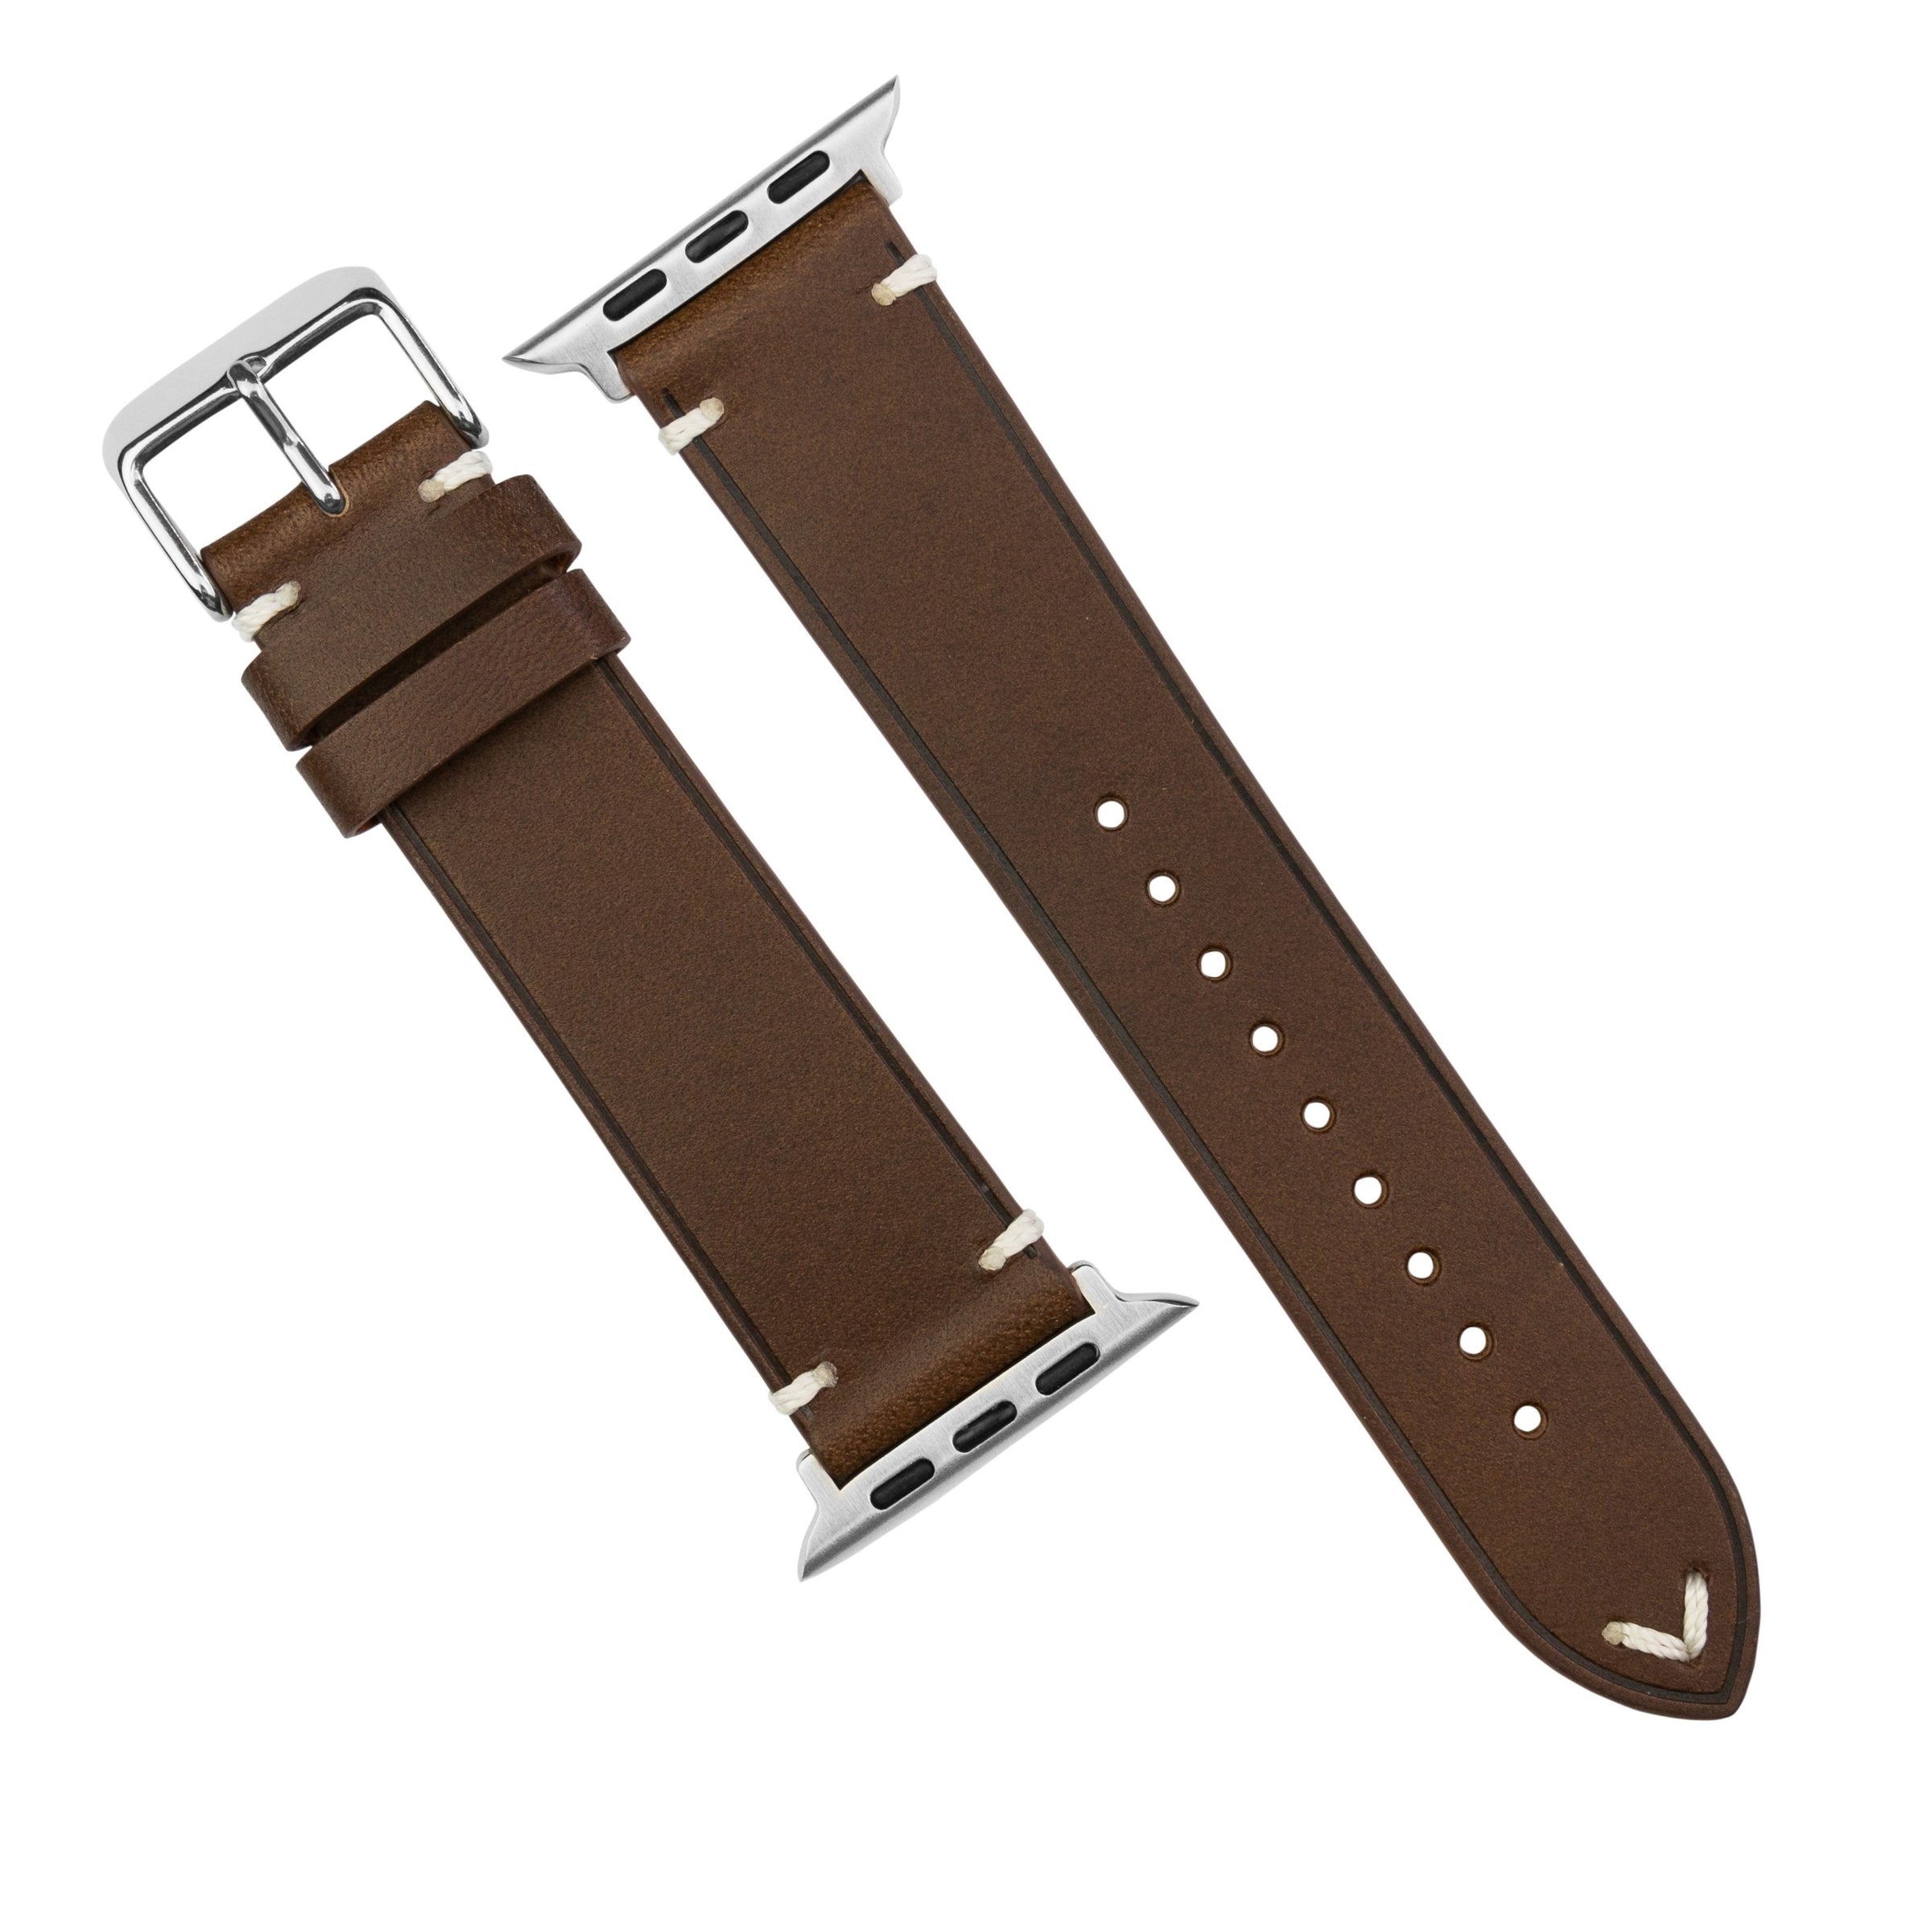 Vintage Buttero Leather Strap in Brown (Apple Watch)